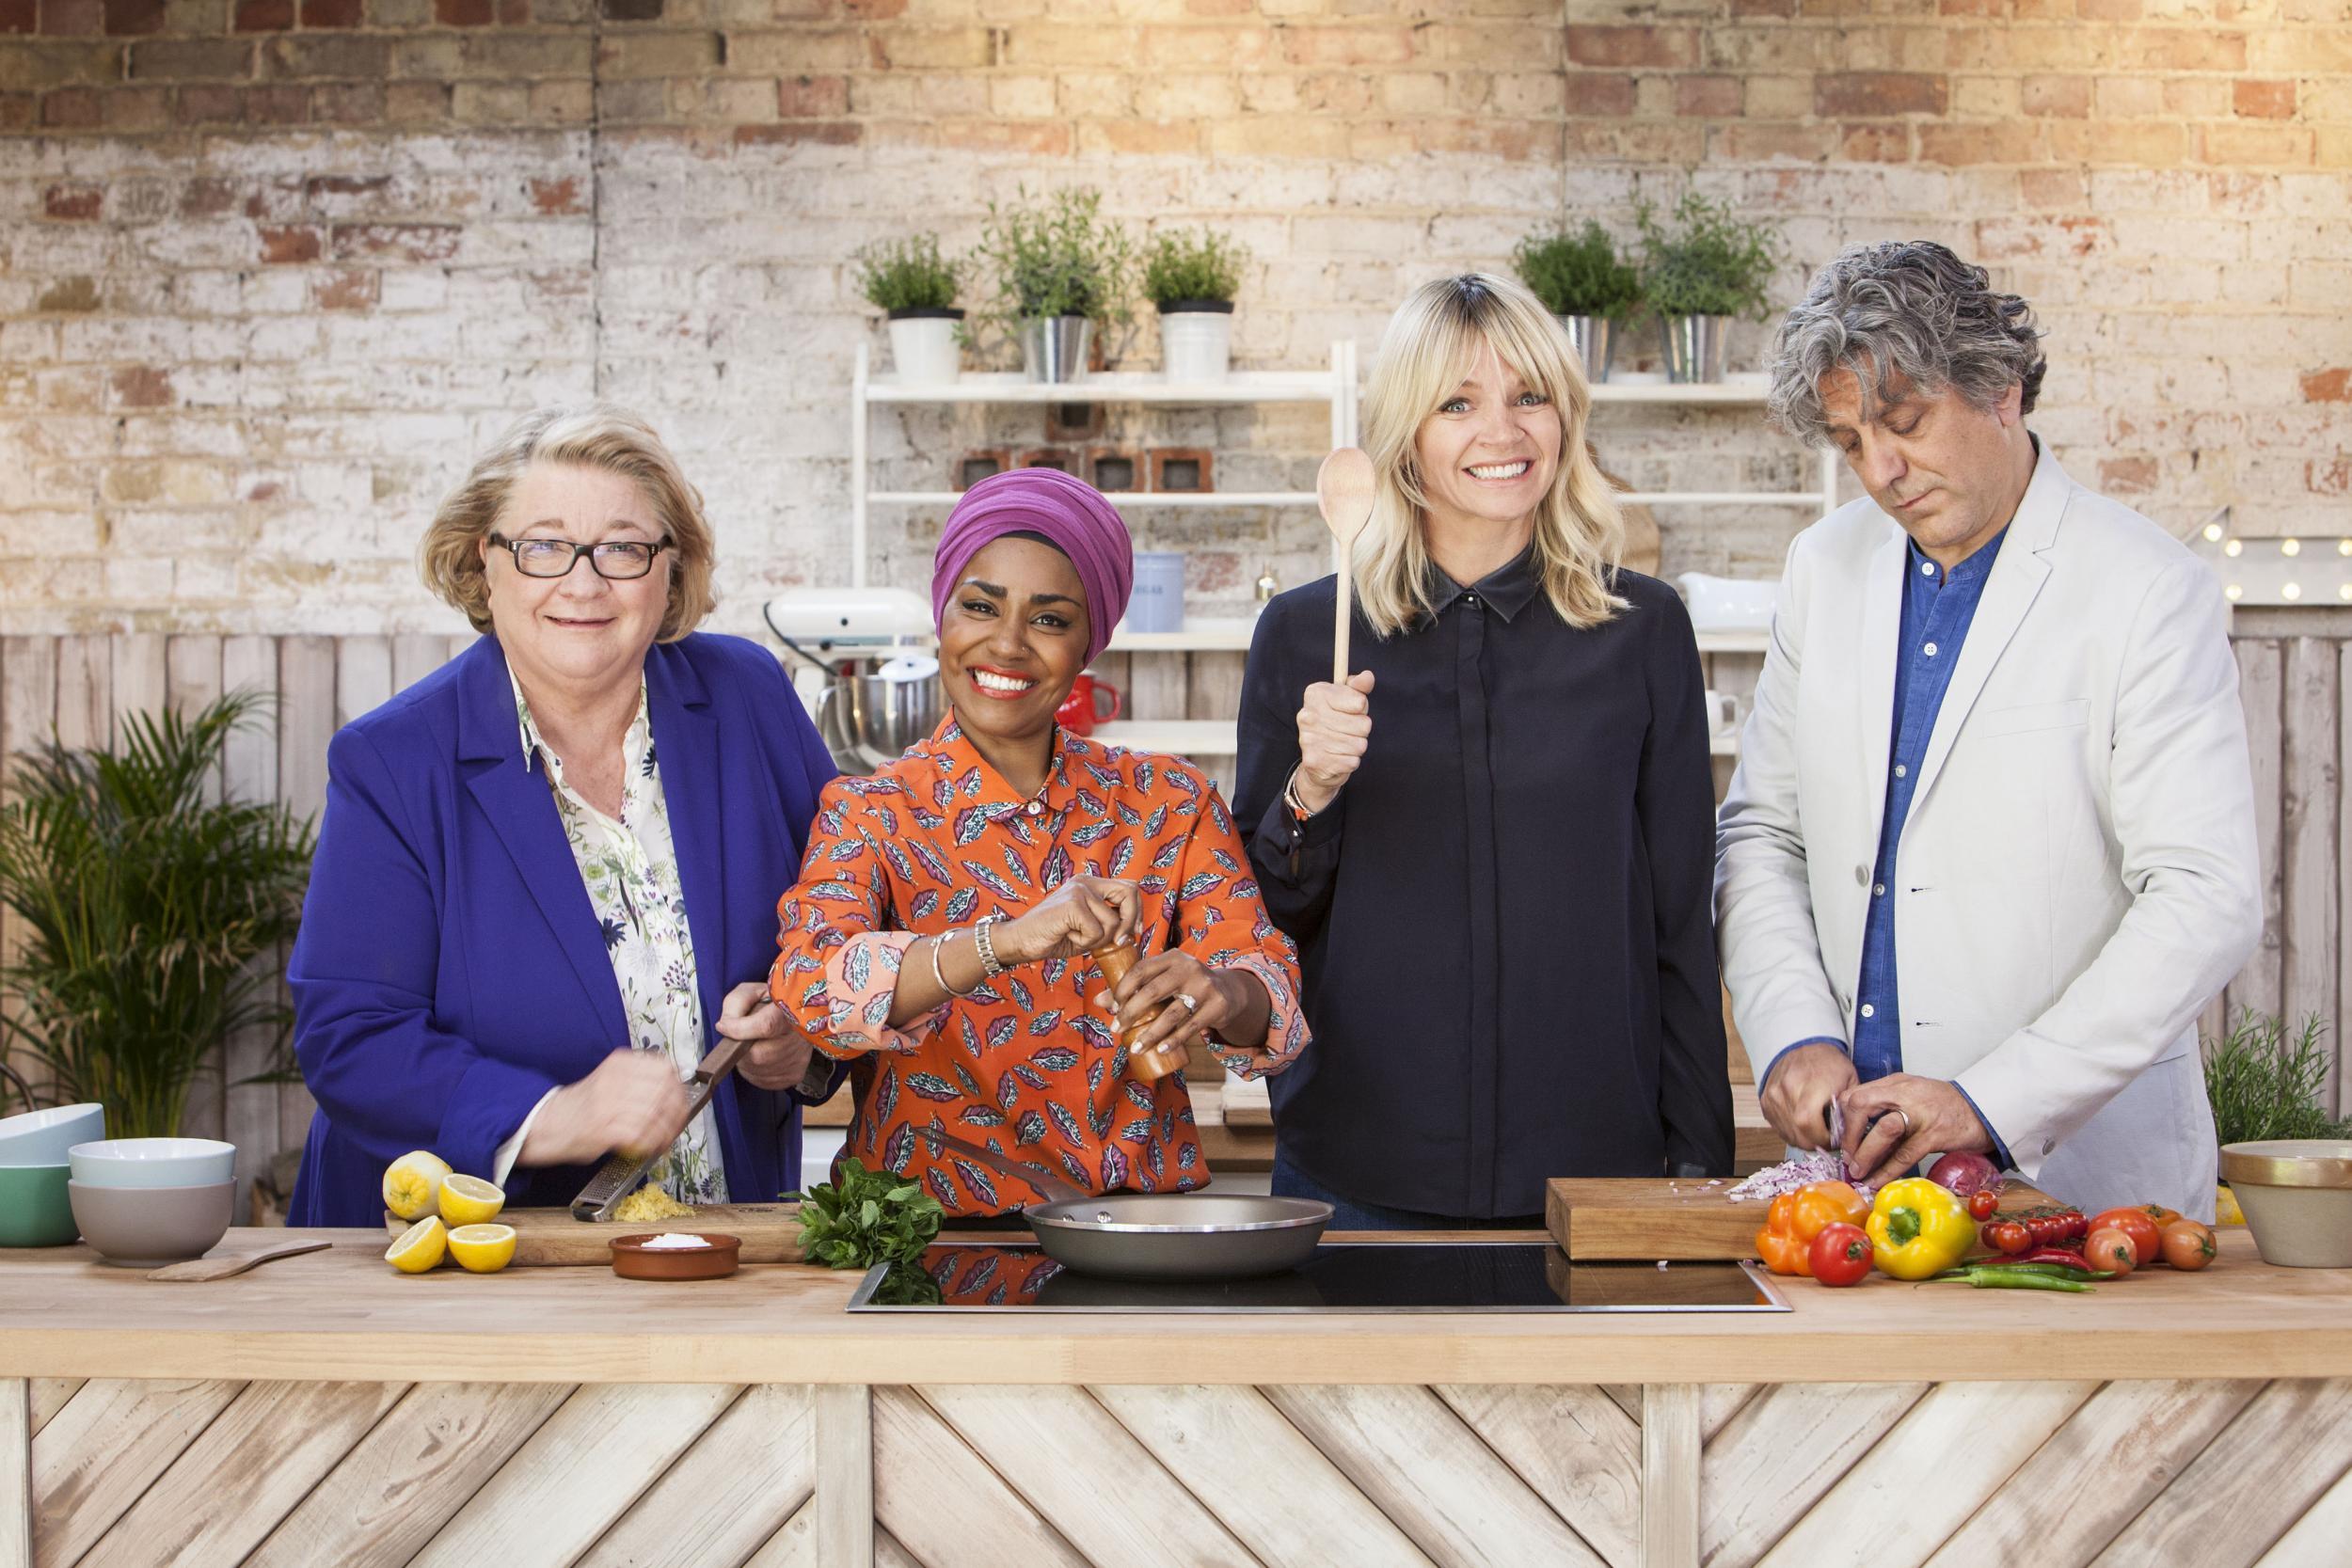 The BBC moved their new cooking show, presented by Rosemary Shrager, Nadiya Hussain, Zoe Ball and Giorgio Locatelli